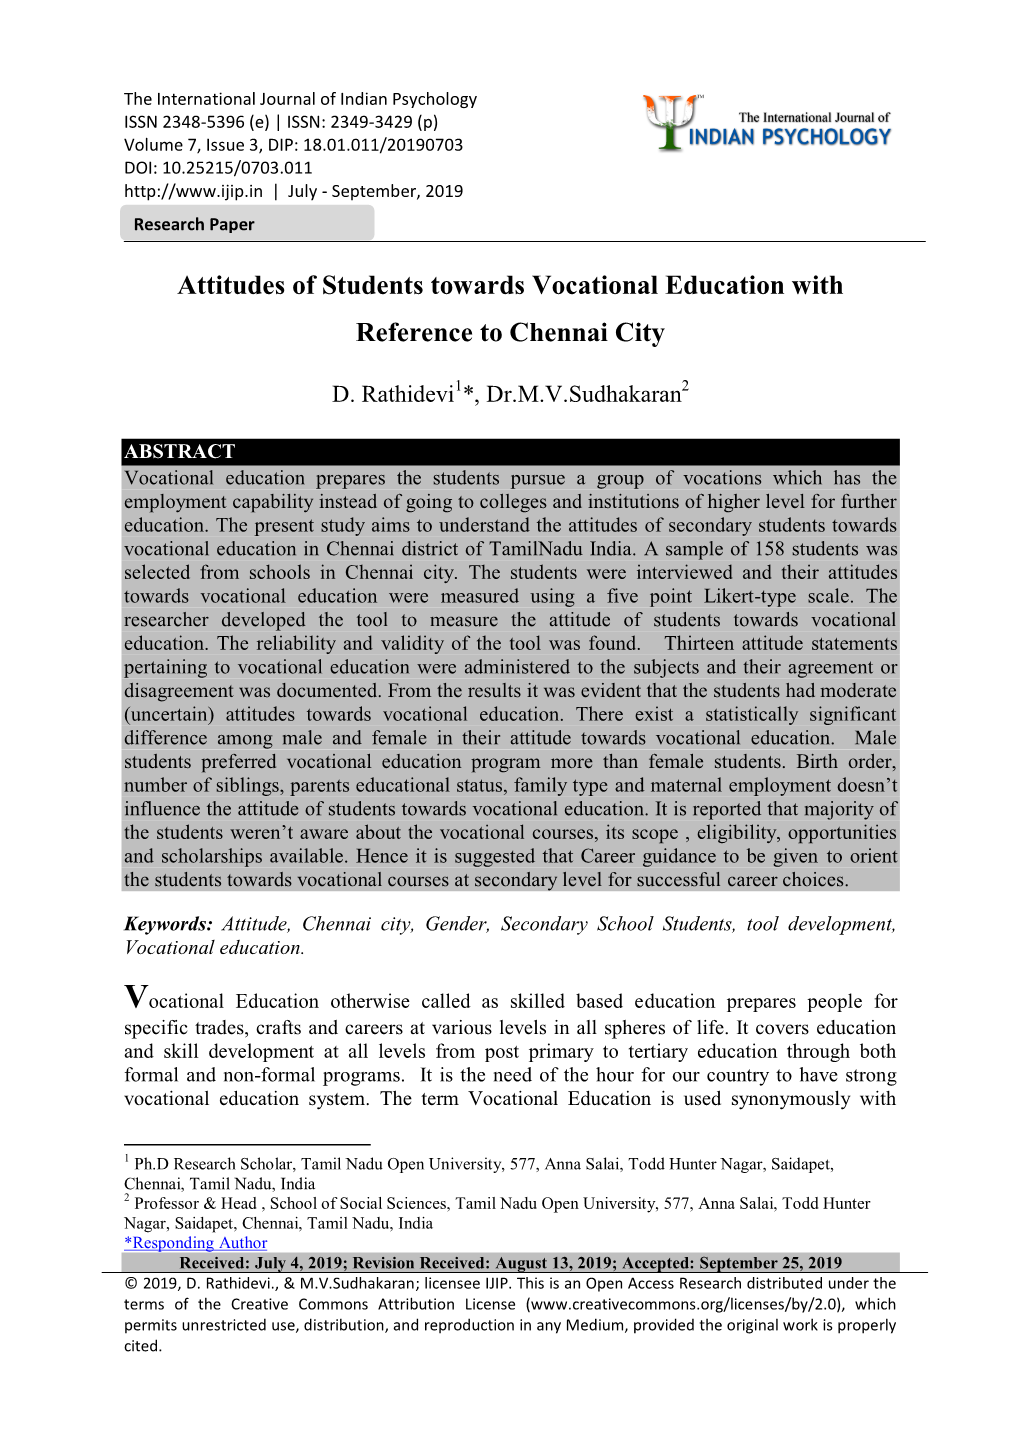 Attitudes of Students Towards Vocational Education with Reference to Chennai City